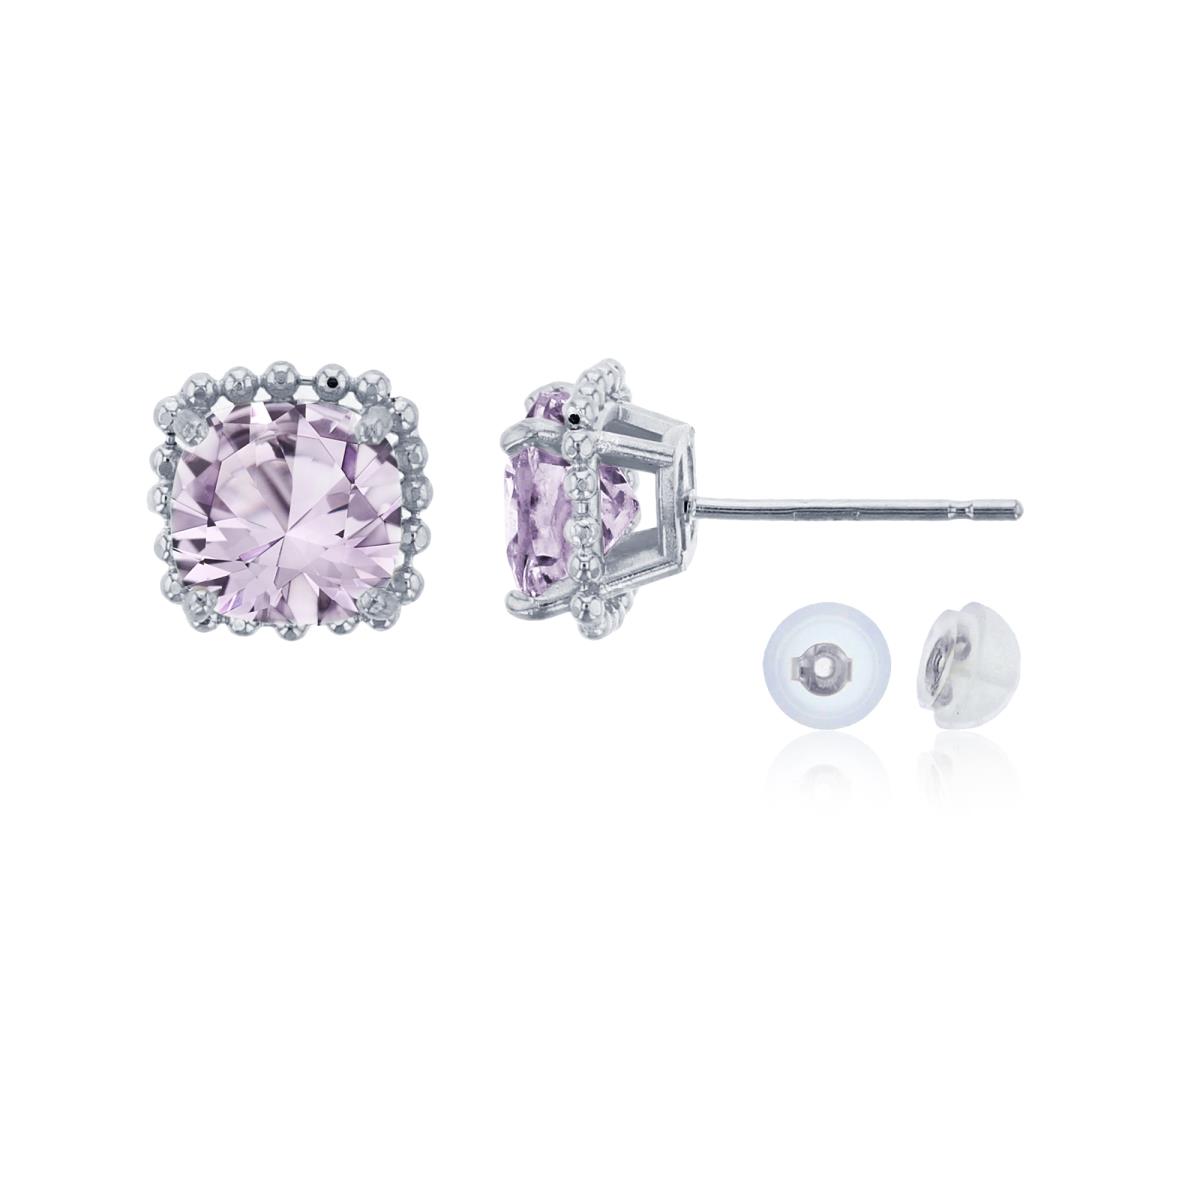 10K White Gold 6x6mm Cushion Cut Rose De France Bead Frame Stud Earring with Silicone Back